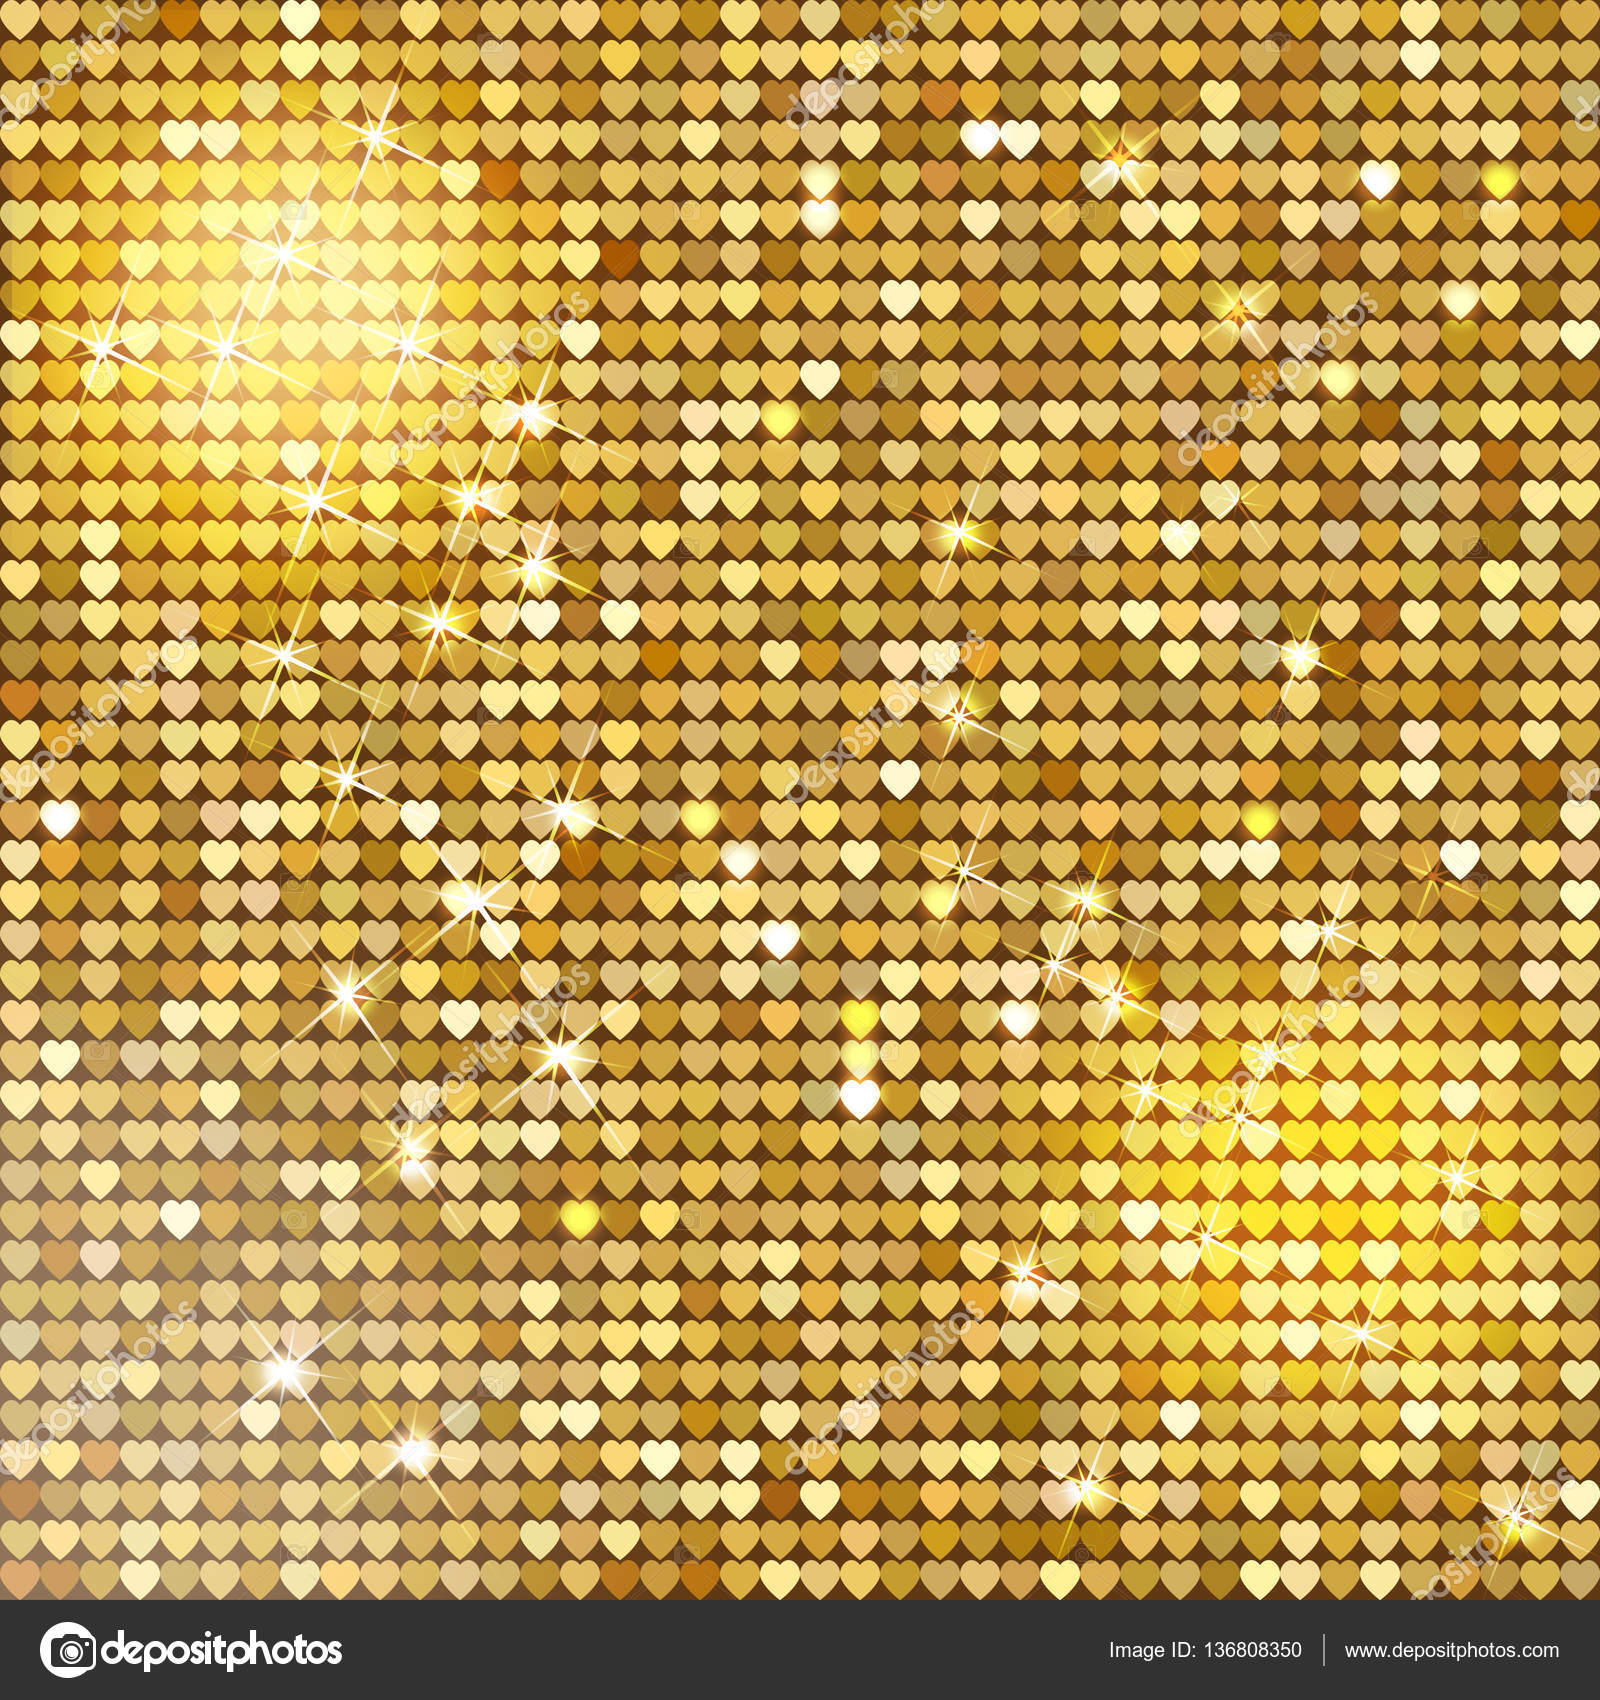 Seamless pattern background with gold glitter hearts. Vector